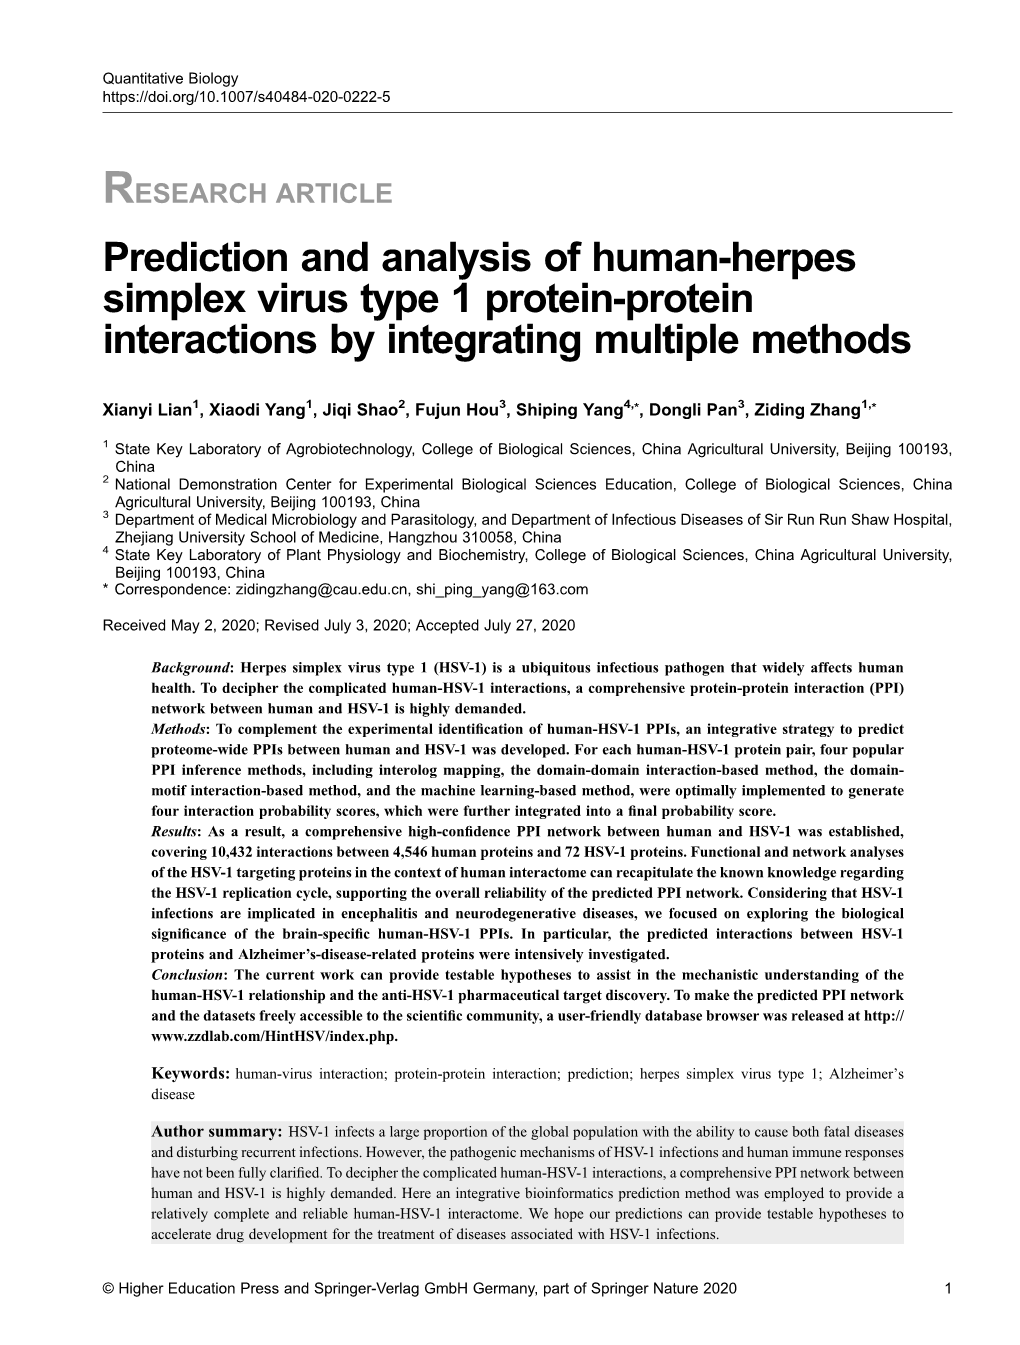 Prediction and Analysis of Human-Herpes Simplex Virus Type 1 Protein-Protein Interactions by Integrating Multiple Methods